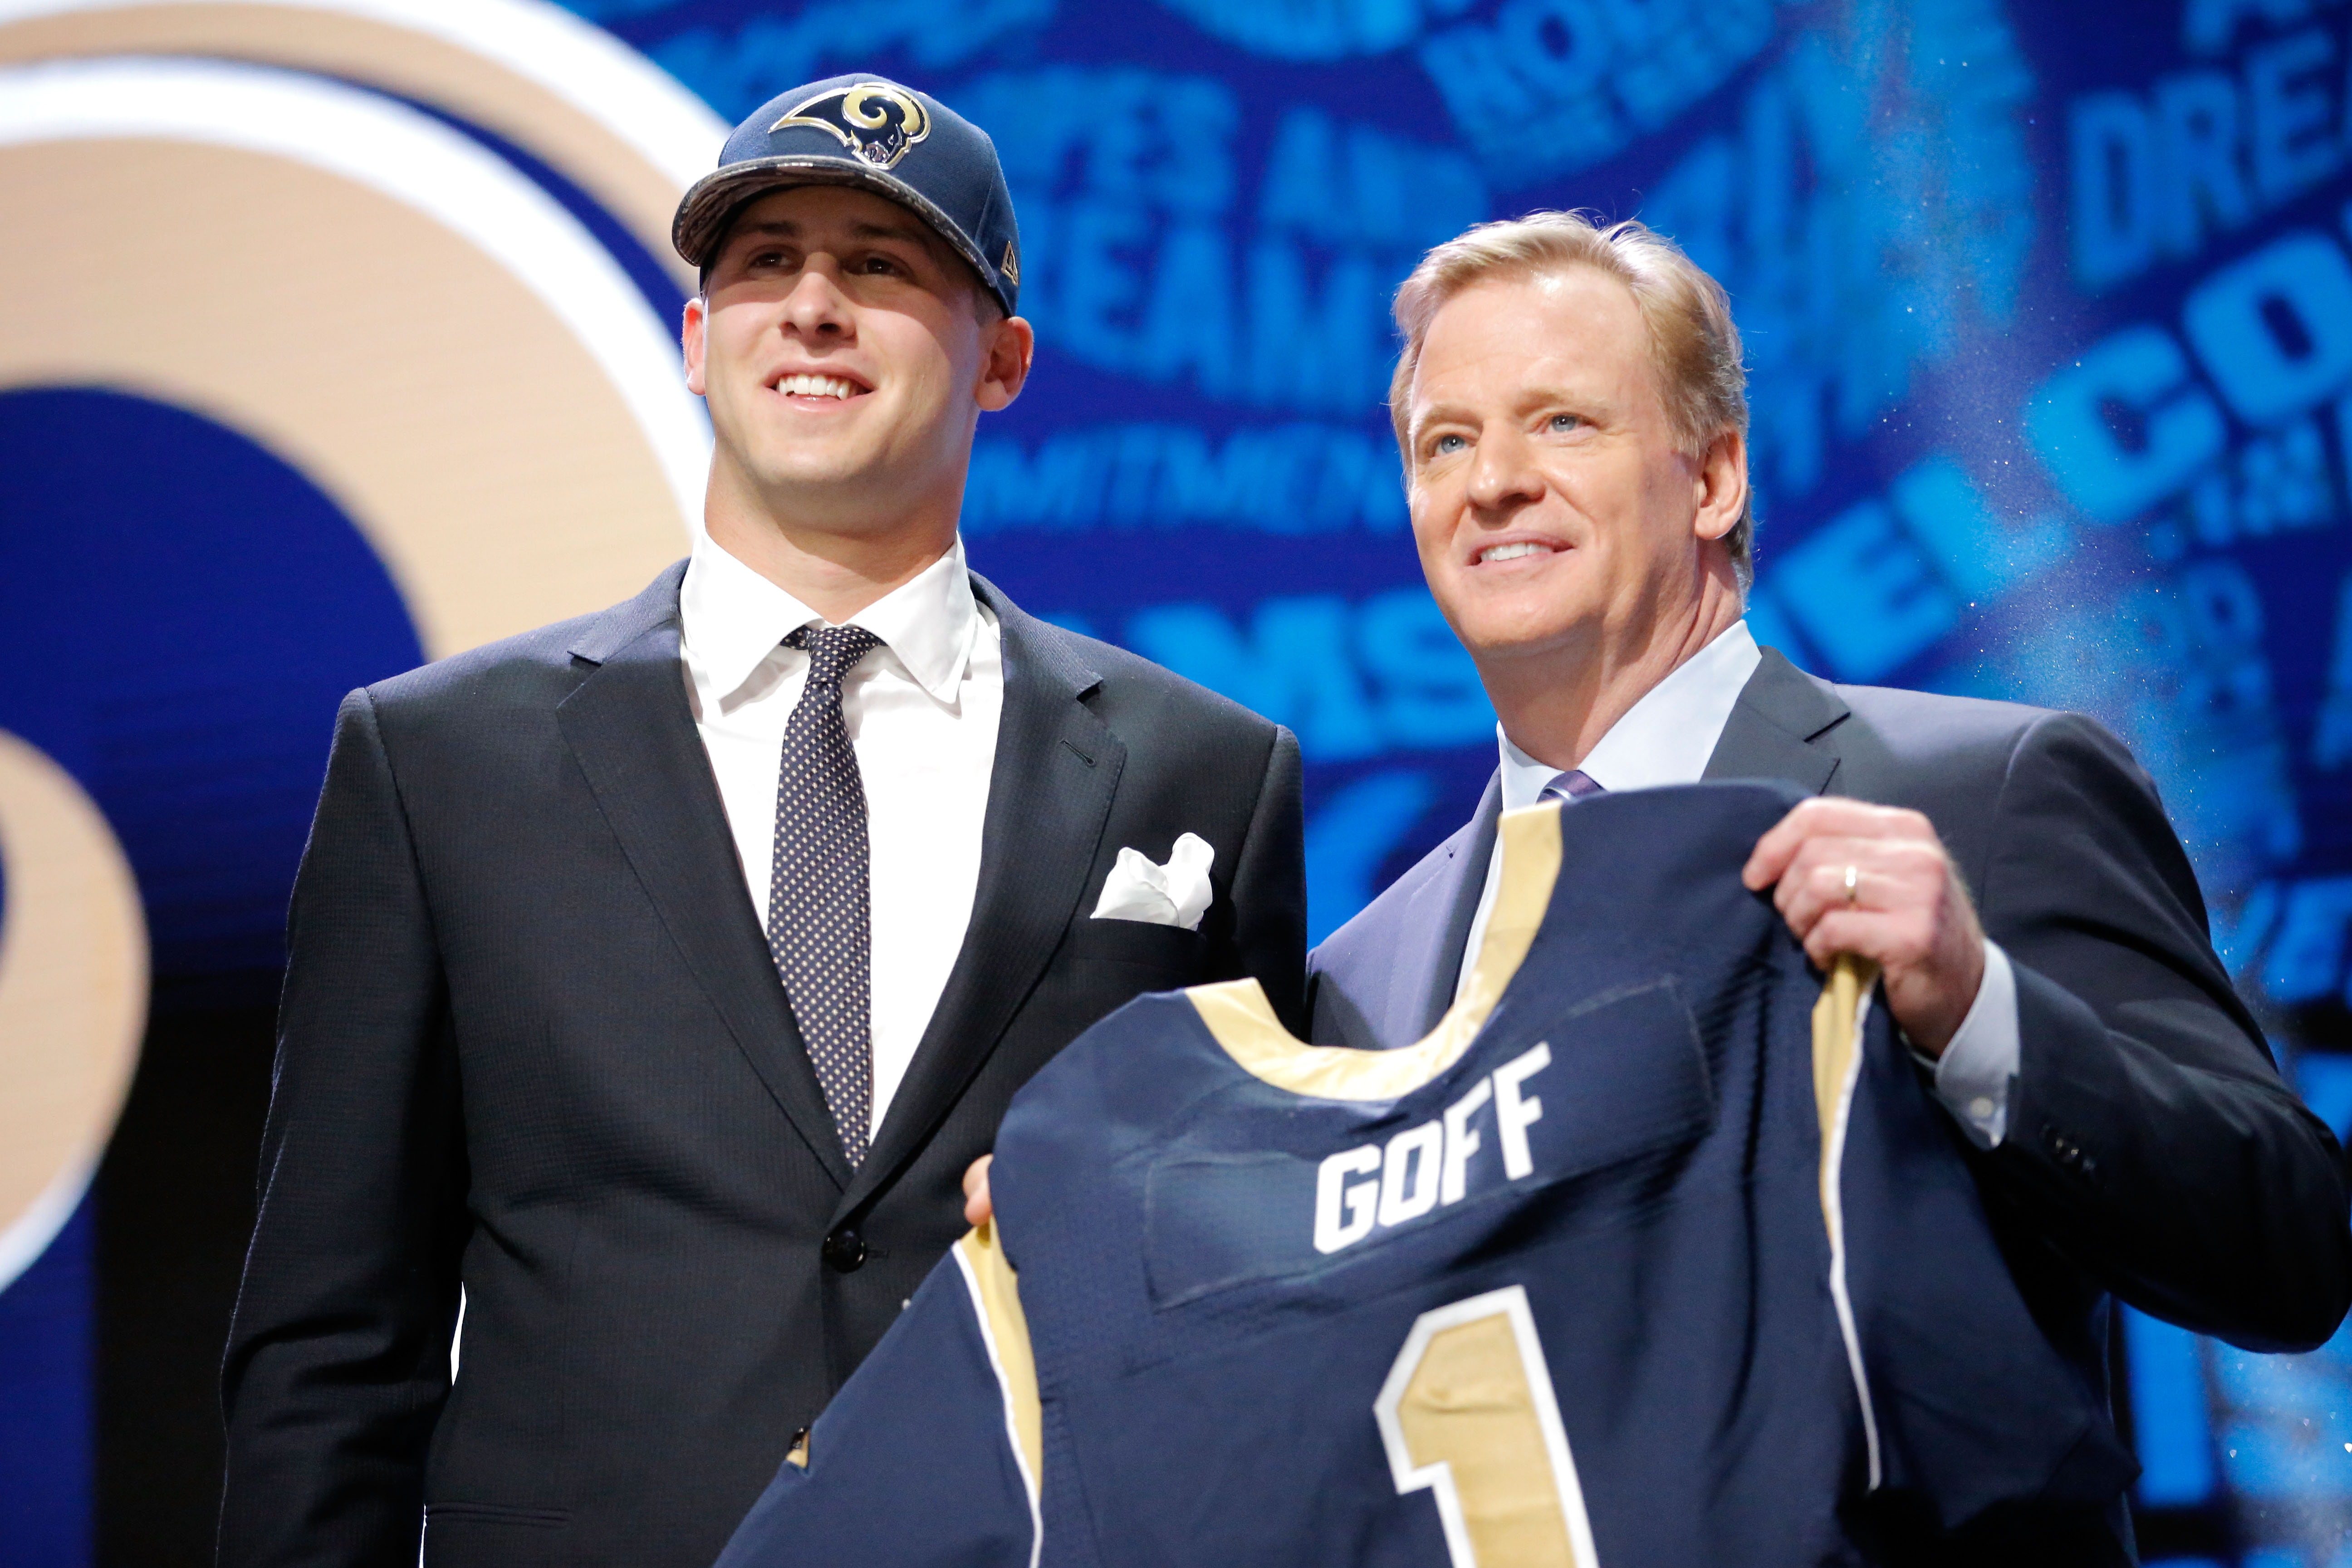 CHICAGO, IL - APRIL 28:  (L-R) Jared Goff of the California Golden Bears holds up a jersey with NFL Commissioner Roger Goodell after being picked #1 overall by the Los Angeles Rams during the first round of the 2016 NFL Draft at the Auditorium Theatre of Roosevelt University on April 28, 2016 in Chicago, Illinois.  (Photo by Jon Durr/Getty Images)